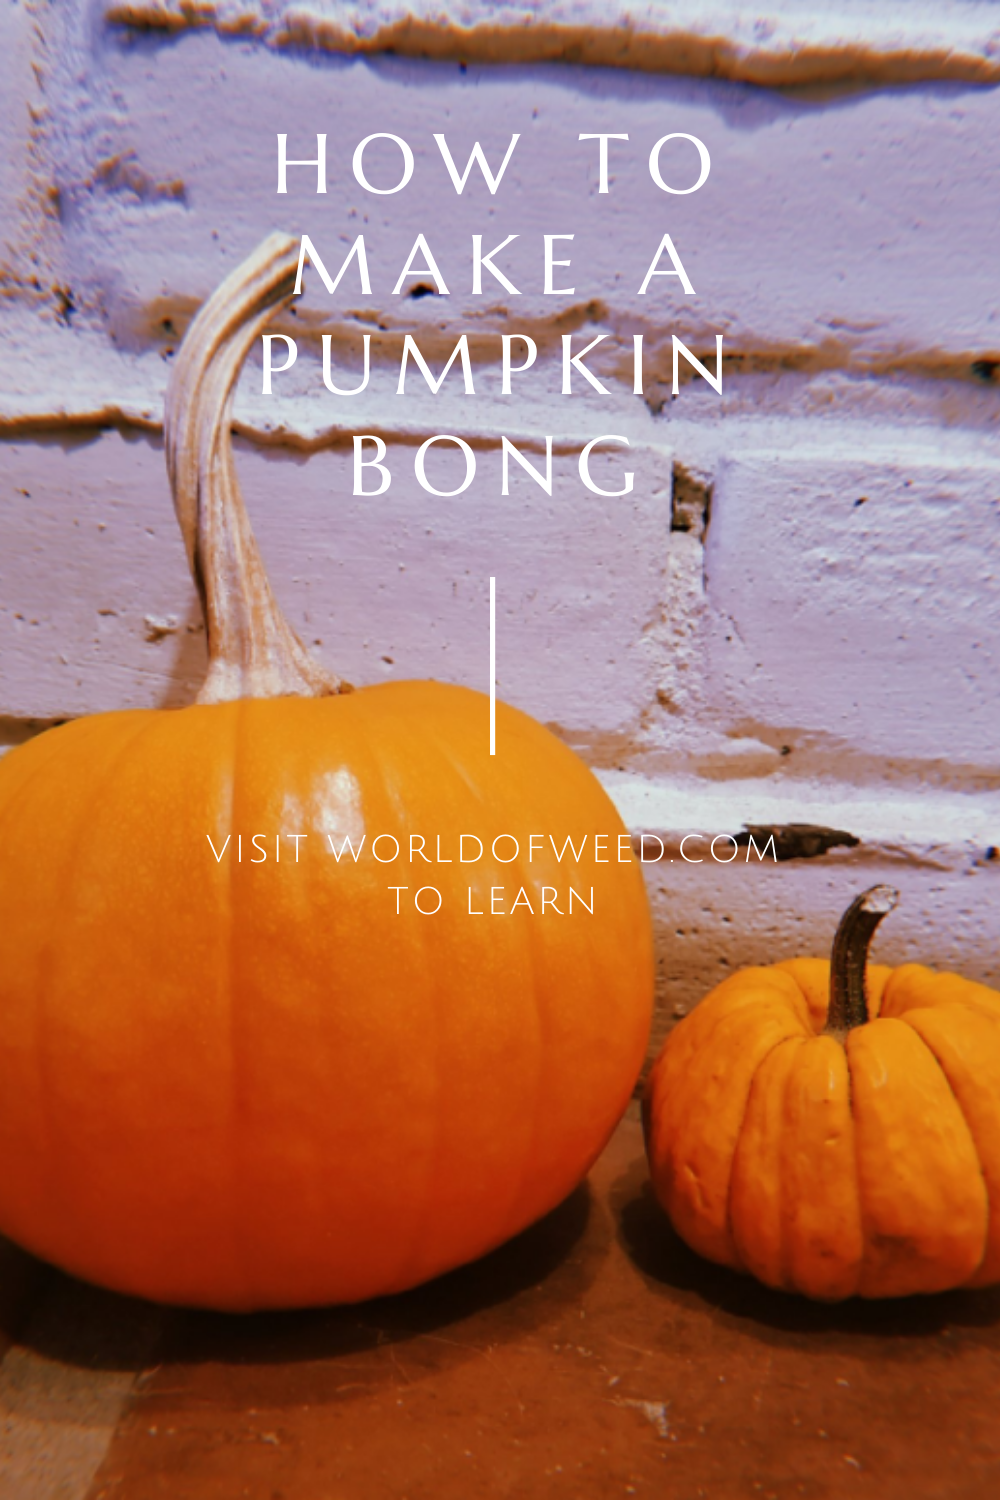 How to Make a Pumpkin Bong (in 6 Easy Steps)